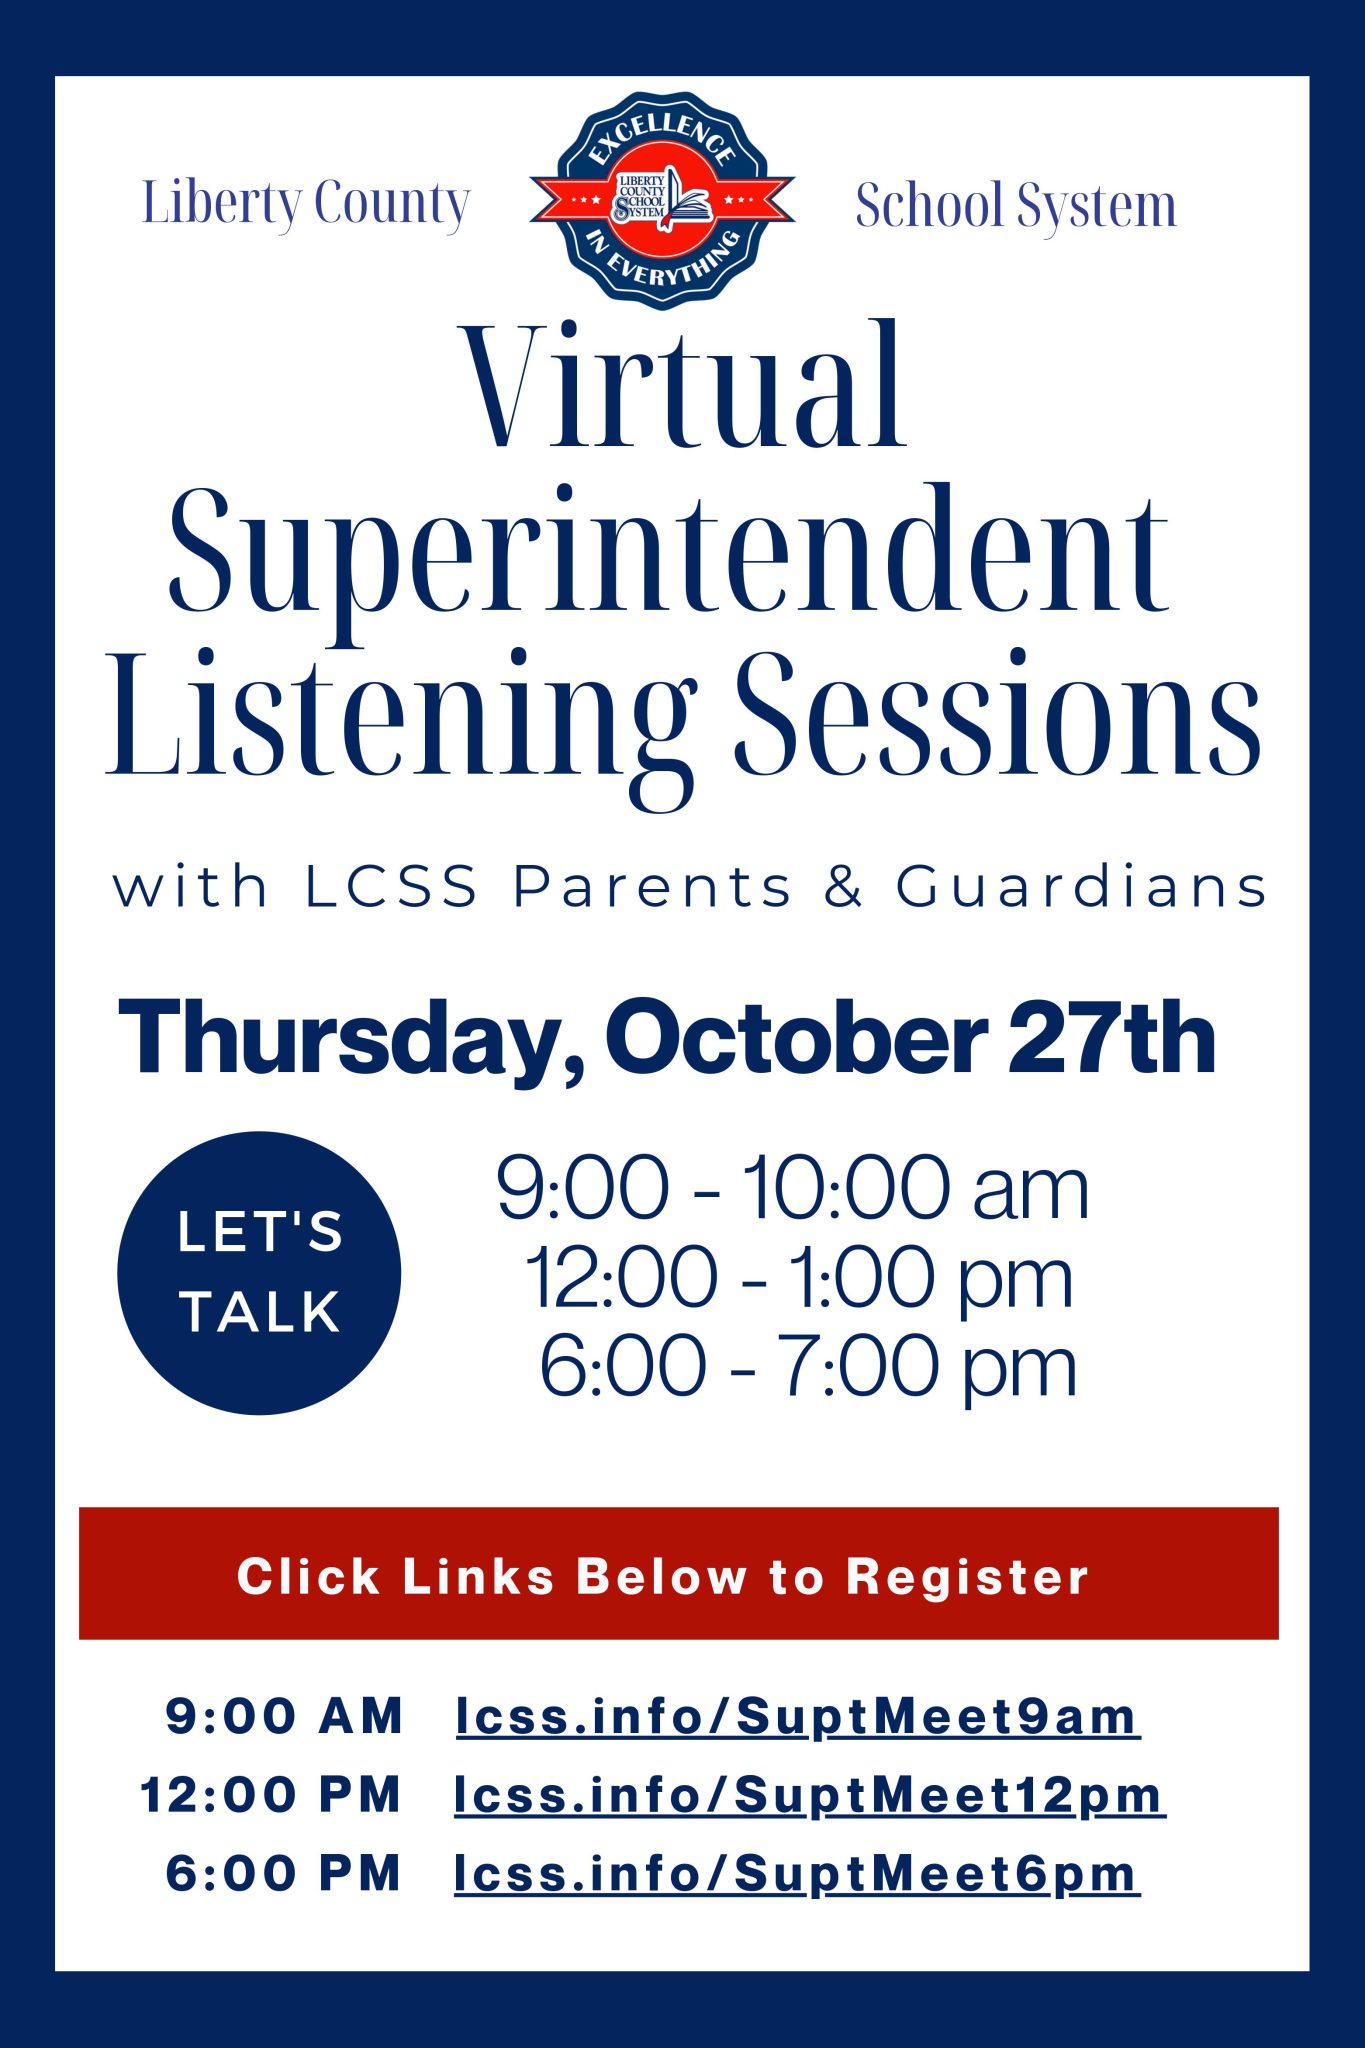 Flyer for Virtual Superintendent Listening Sessions